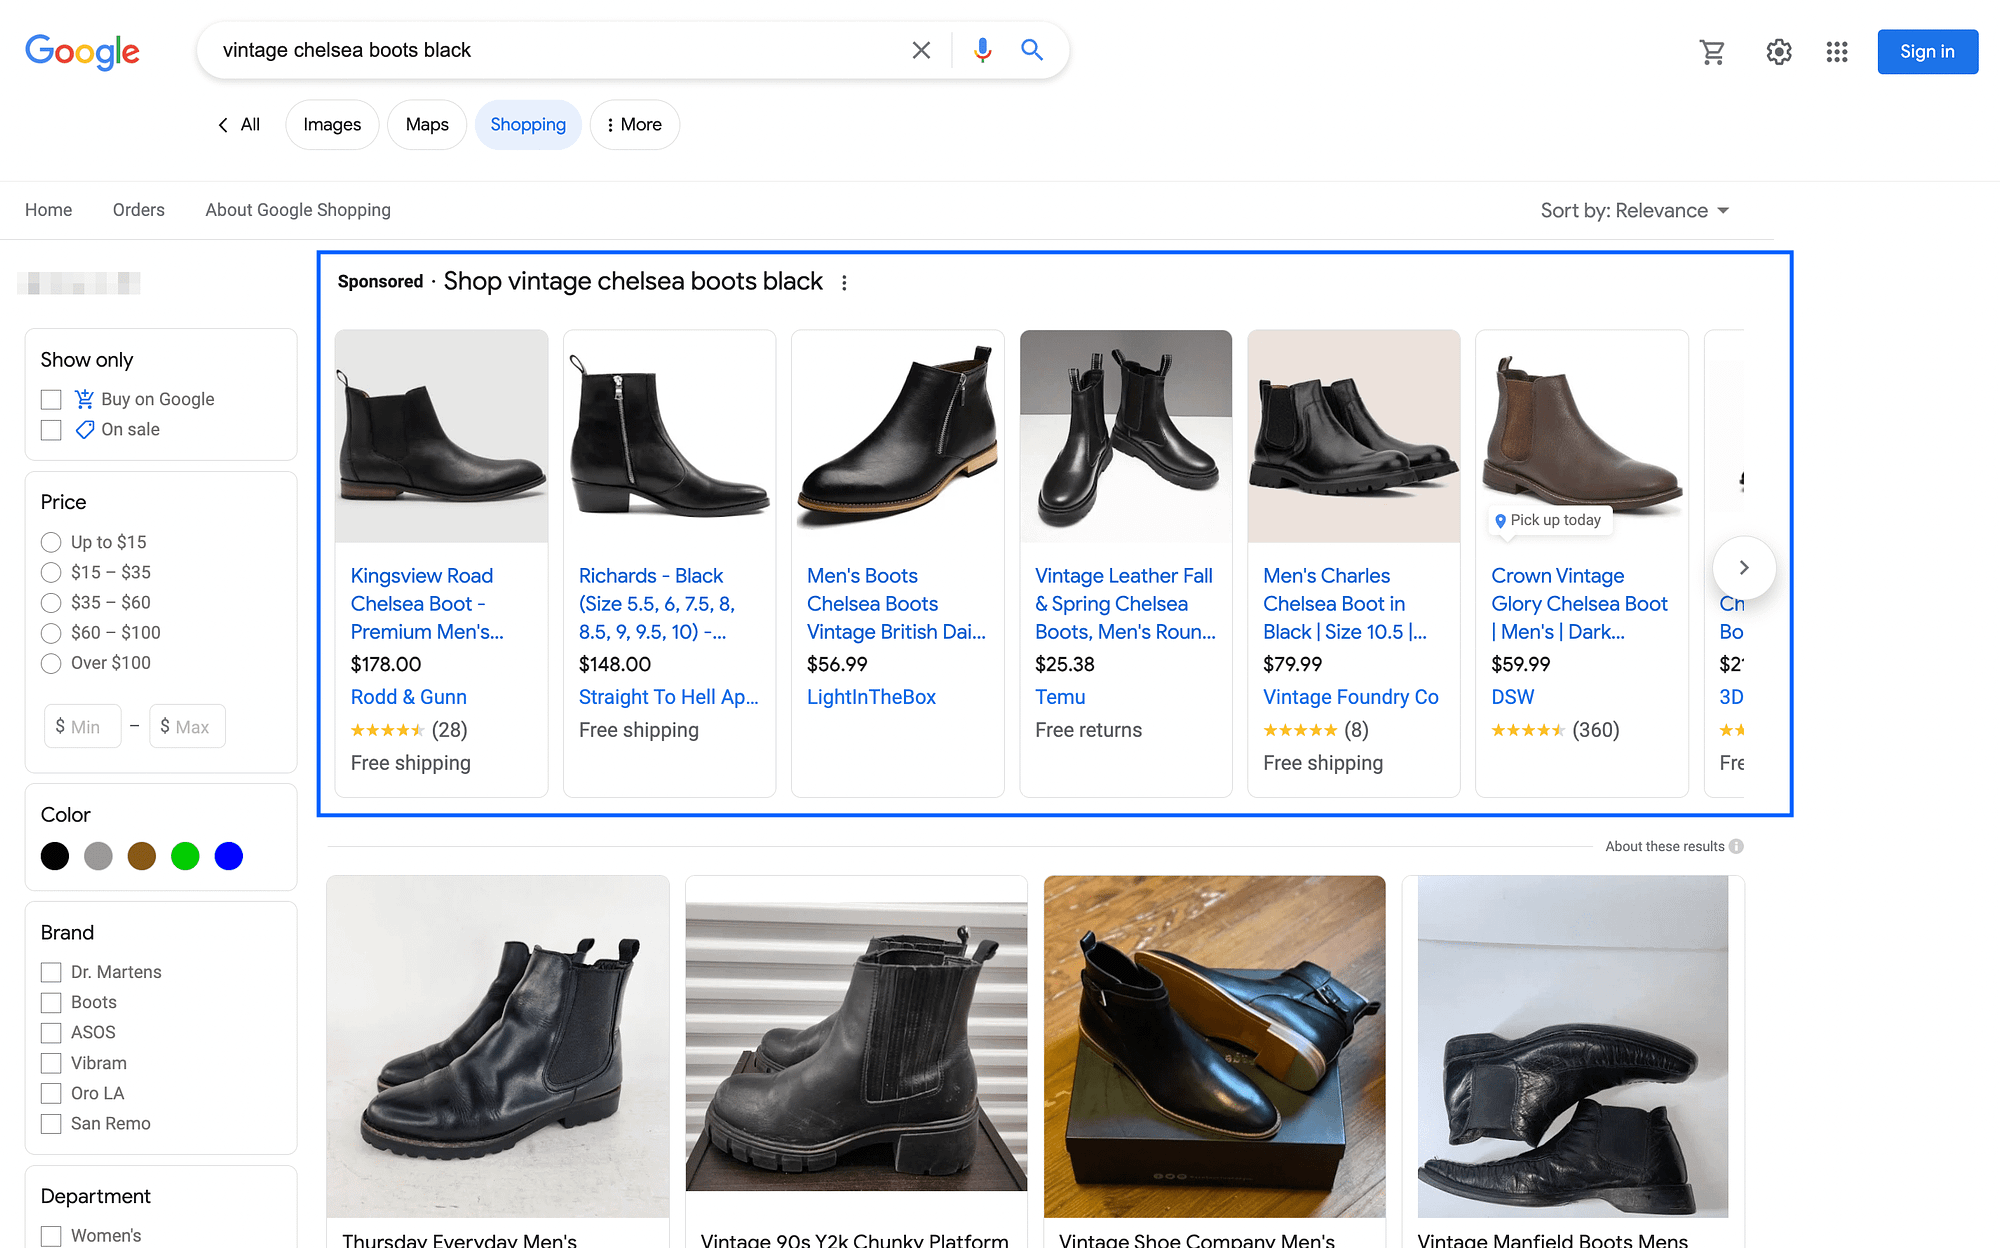 The Google Shopping filter for product search results.